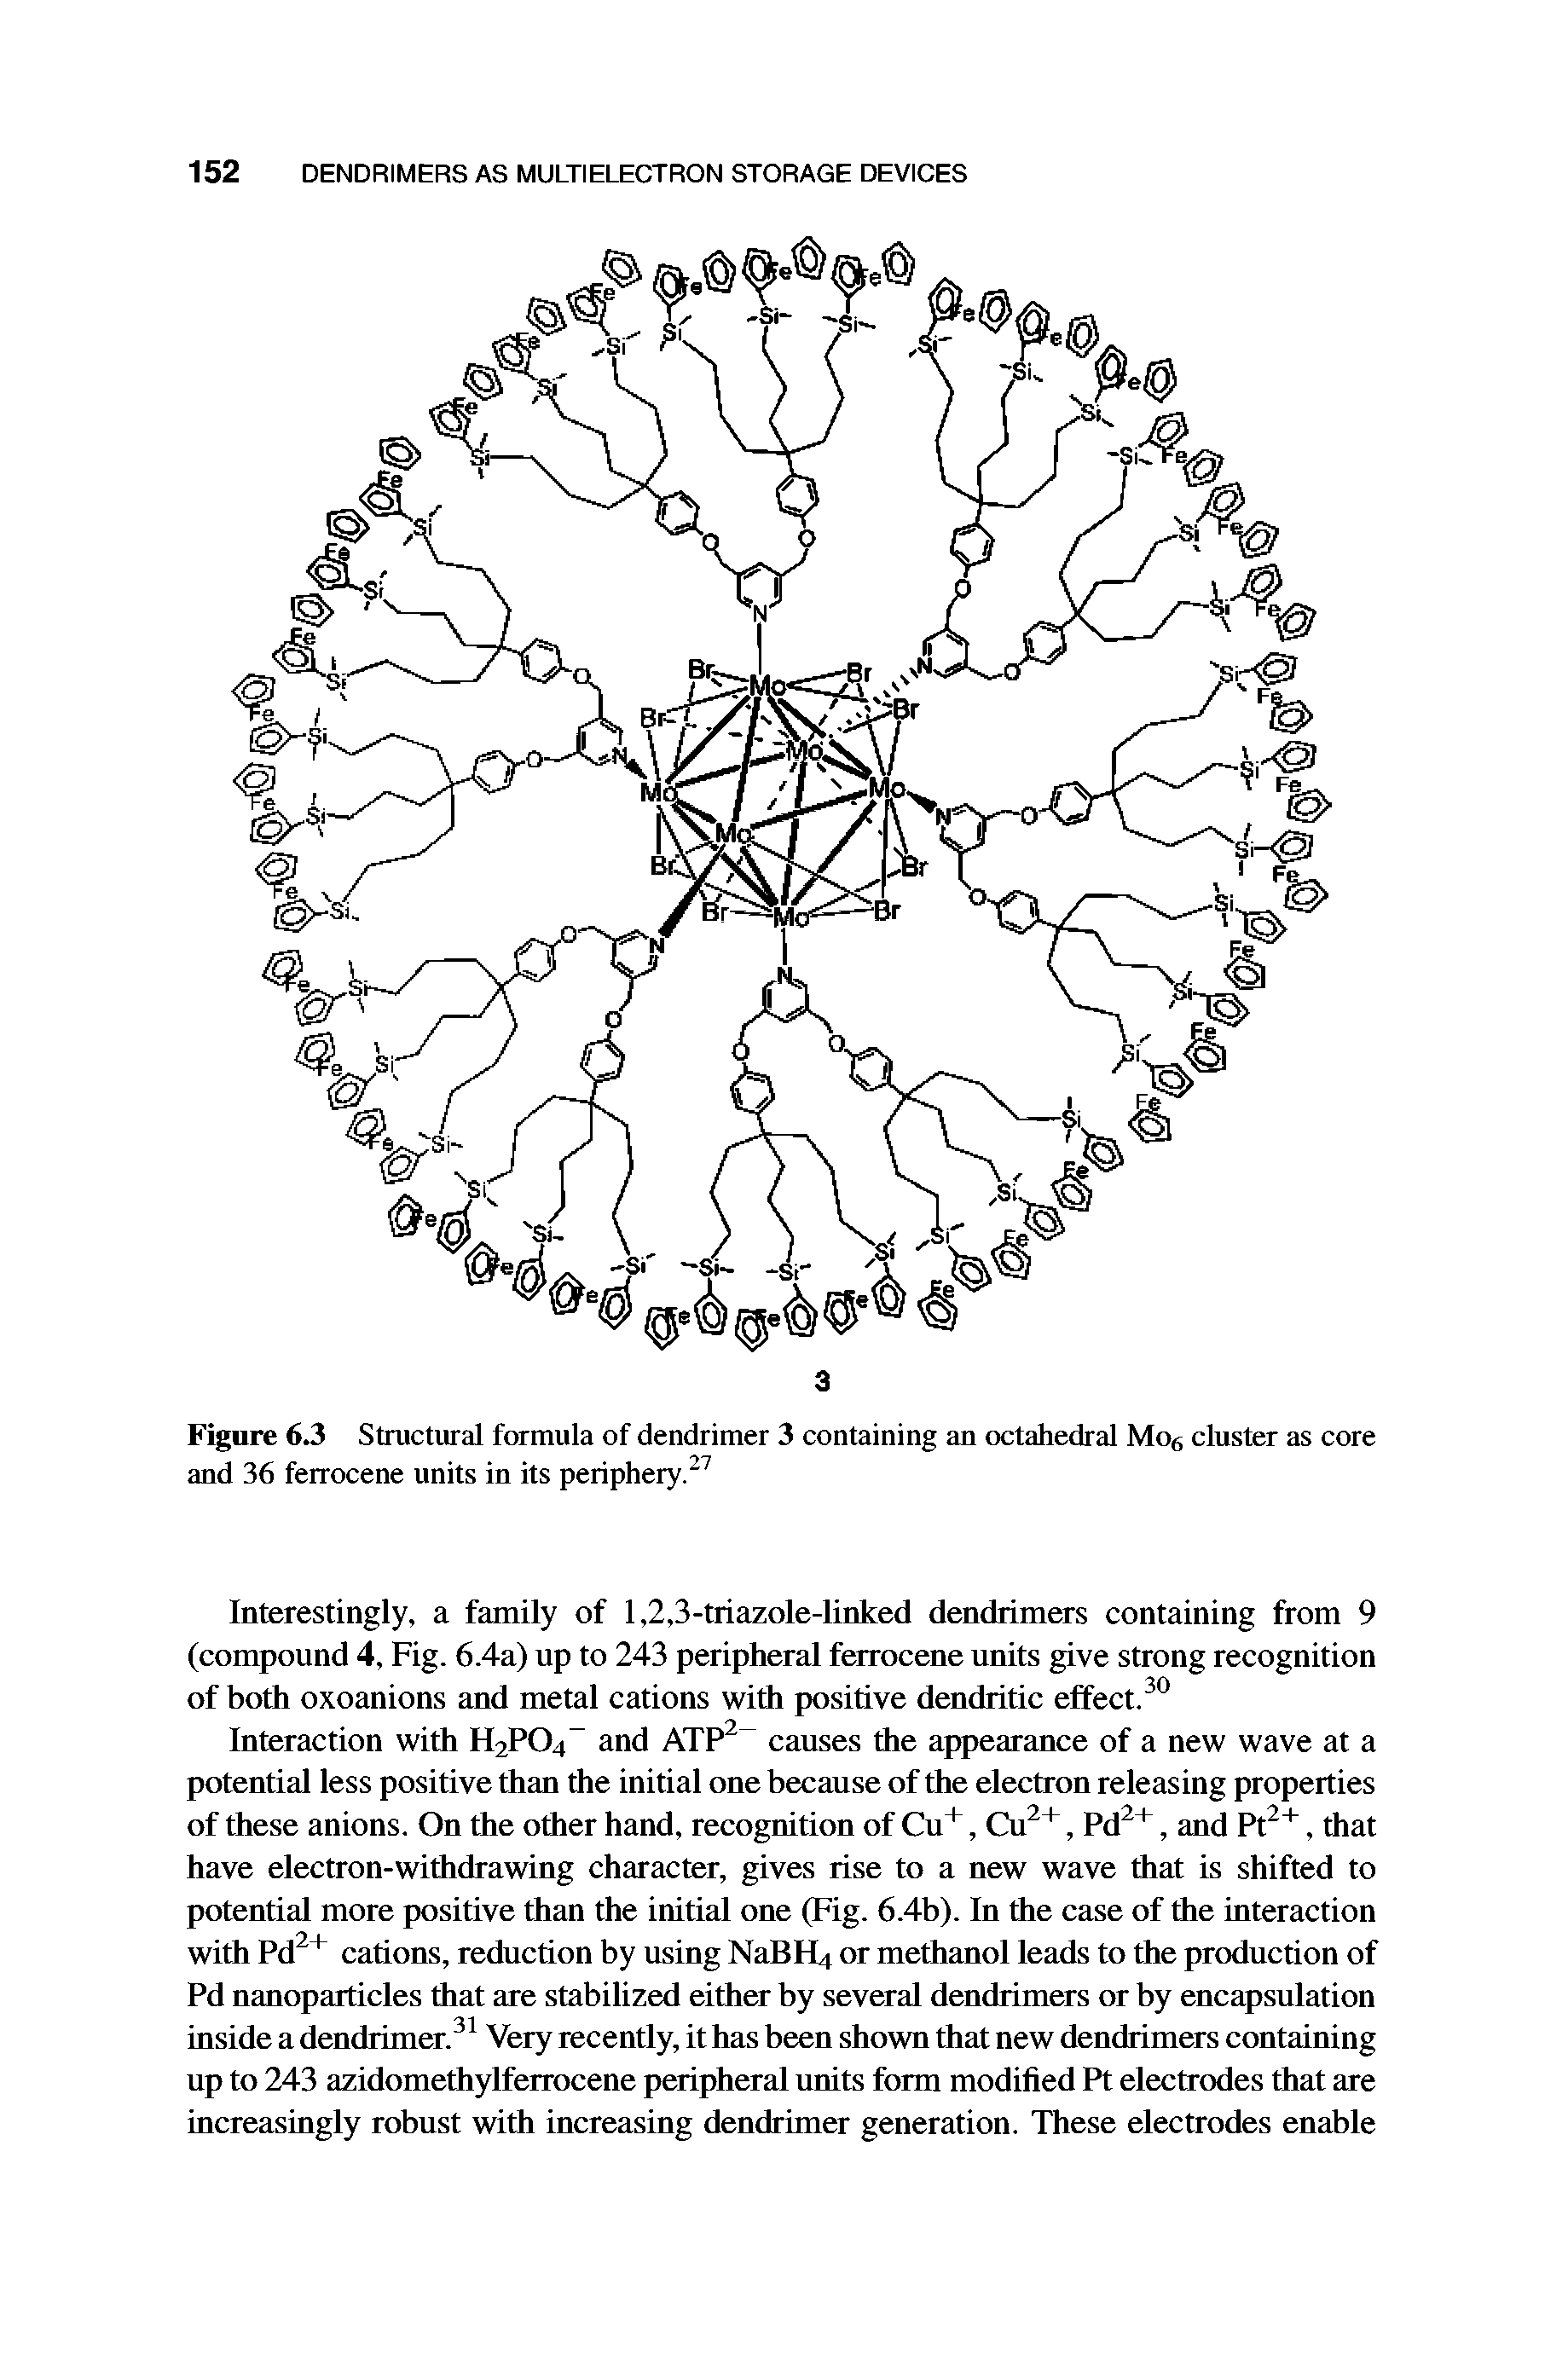 Figure 6.3 Structural formula of dendrimer 3 containing an octahedral Mo6 cluster as core and 36 ferrocene units in its periphery.27...